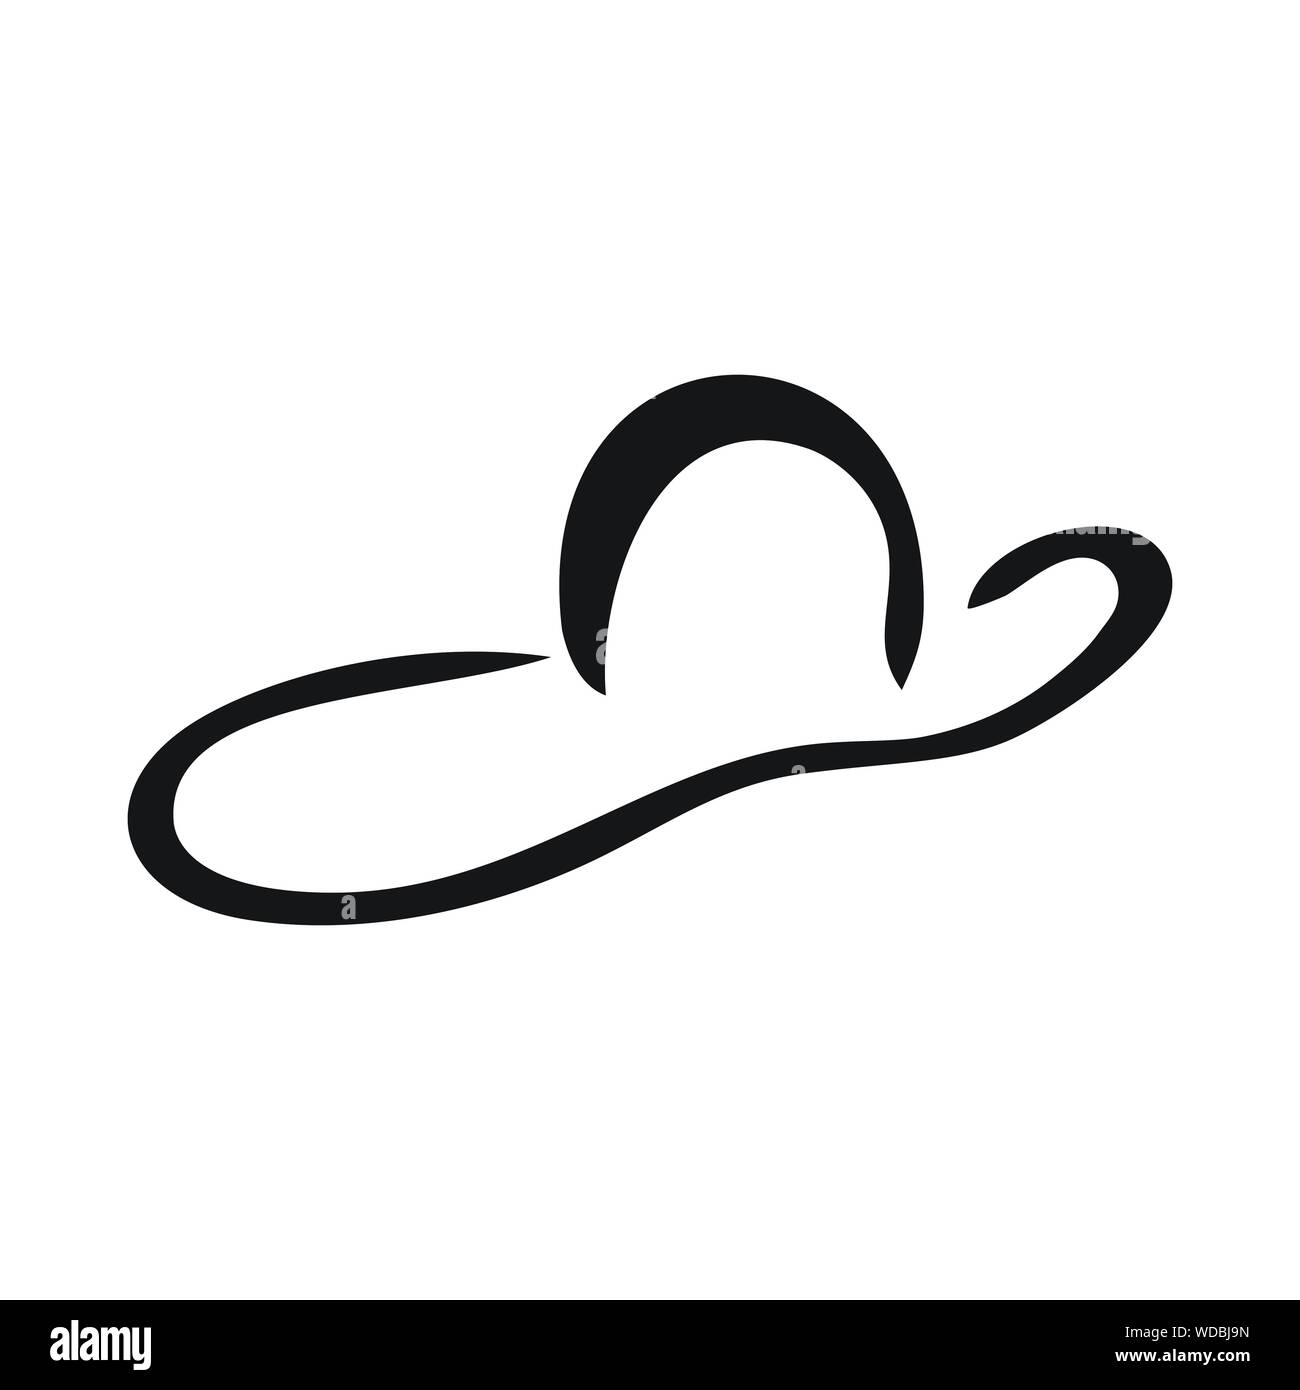 Cowboy hat line art vector icon in black and white Stock Vector